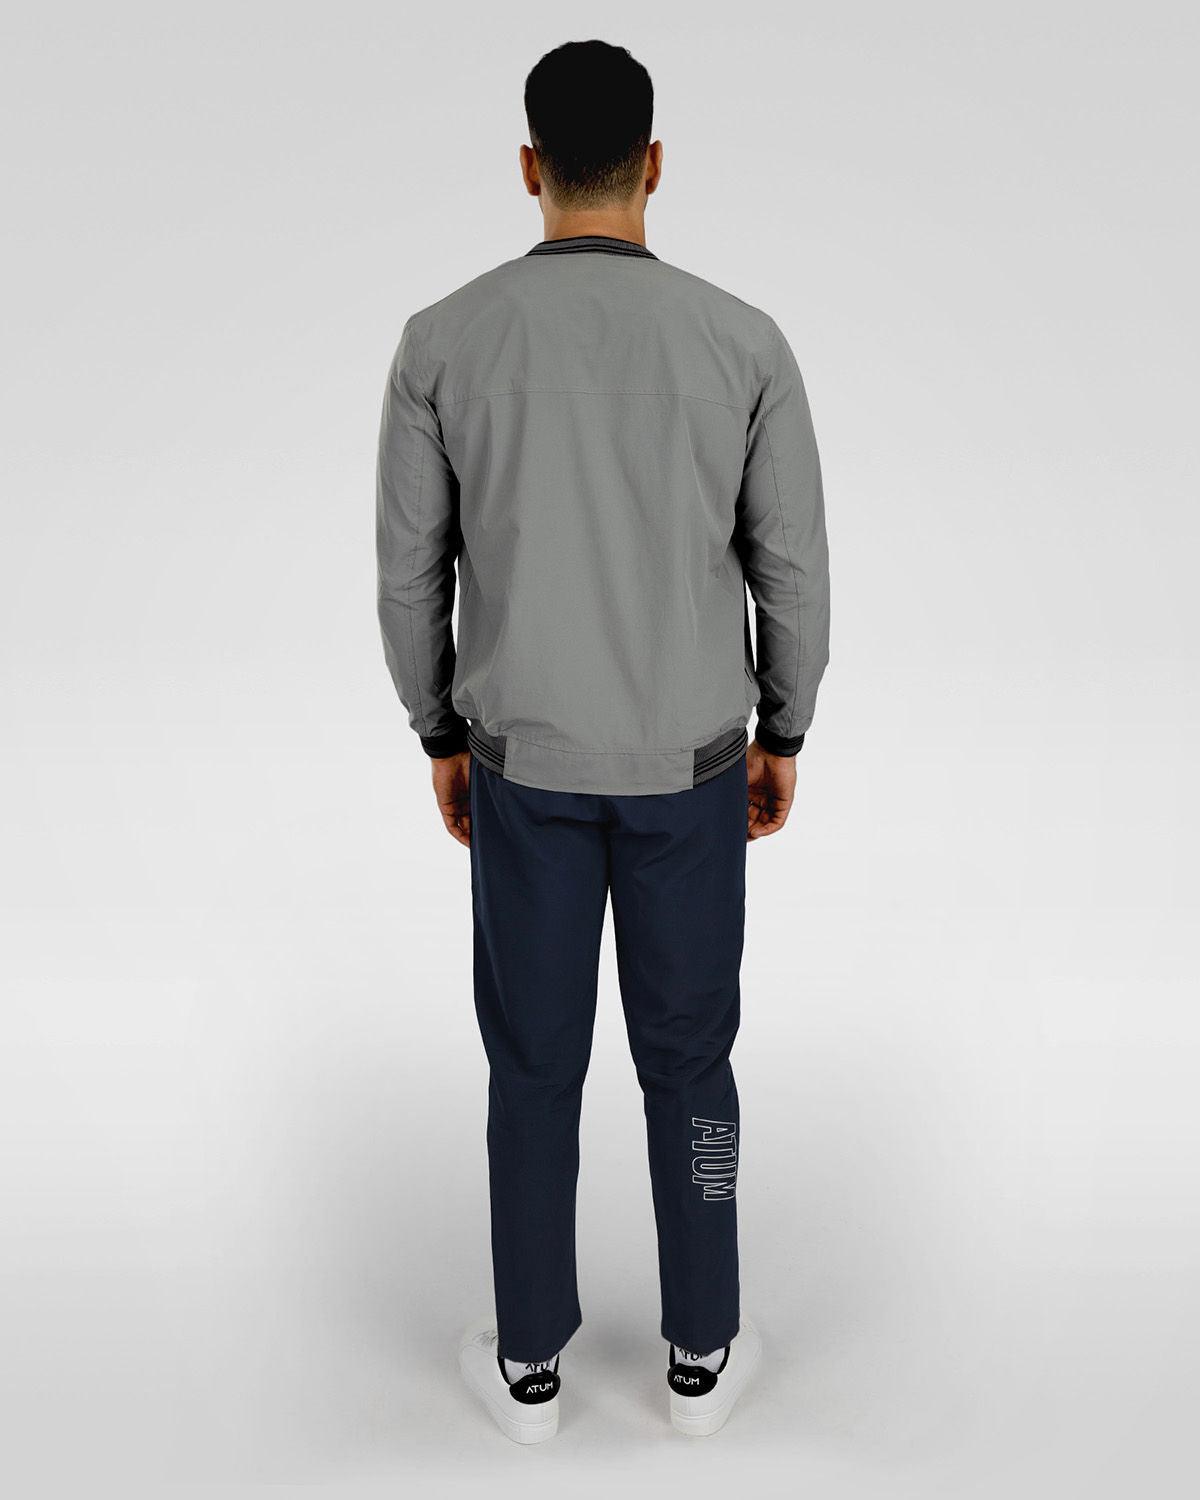 Photo by 𝗔𝗧𝗨ð�— SPORTSWEAR ® on December 20, 2022. May be an image of 1 man wear gray jacket with white basic t-shirt, and navy sweatpants with white shoes.